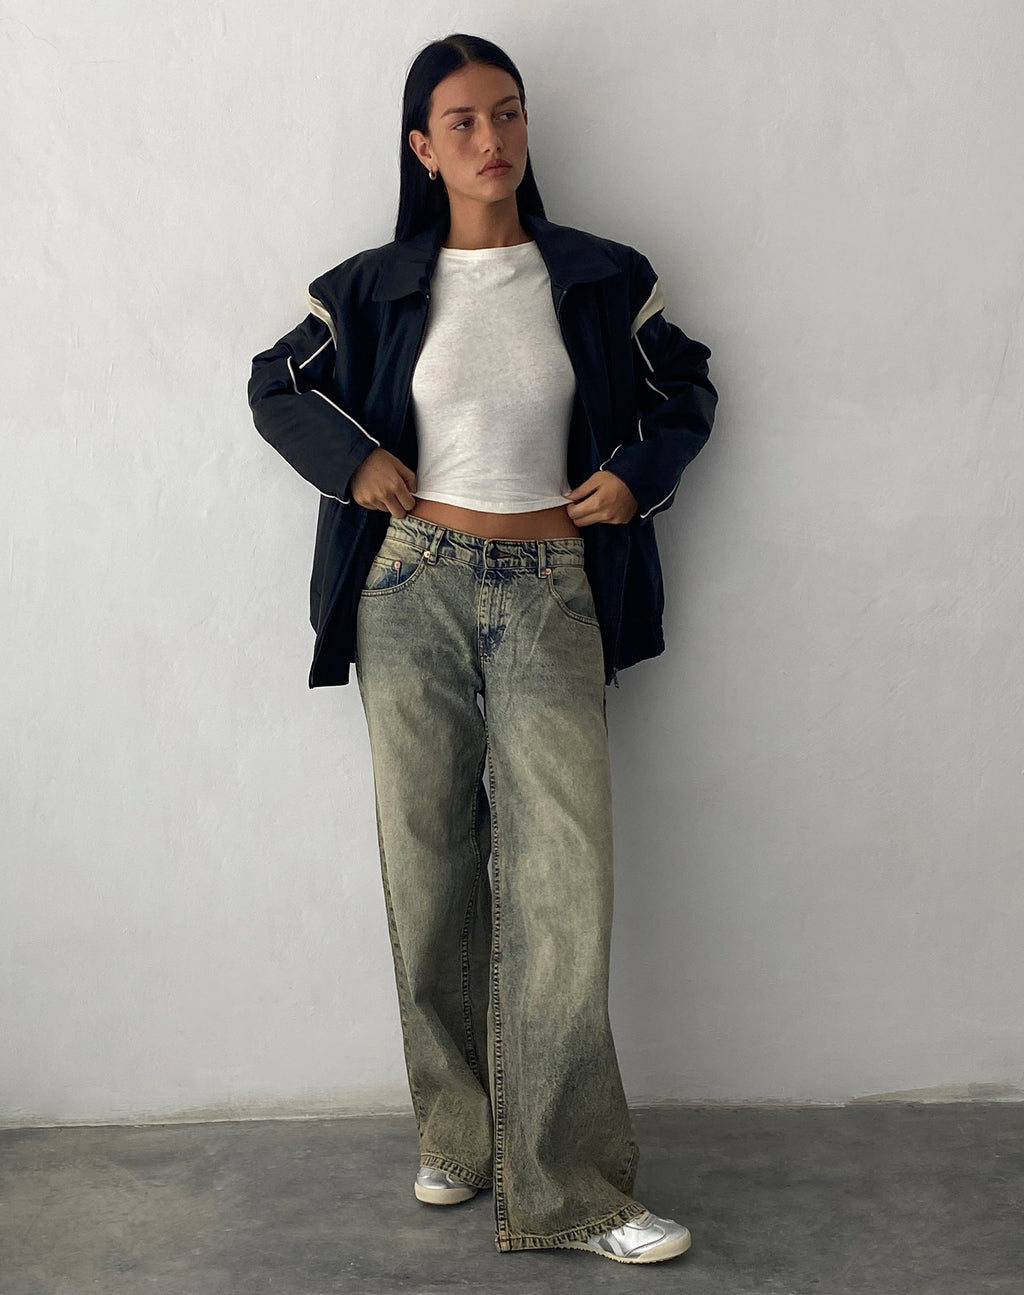 Parallel Jeans in Winter Sandwash  Wide leg jeans outfit, Colored pants  outfits, Stretch denim fabric